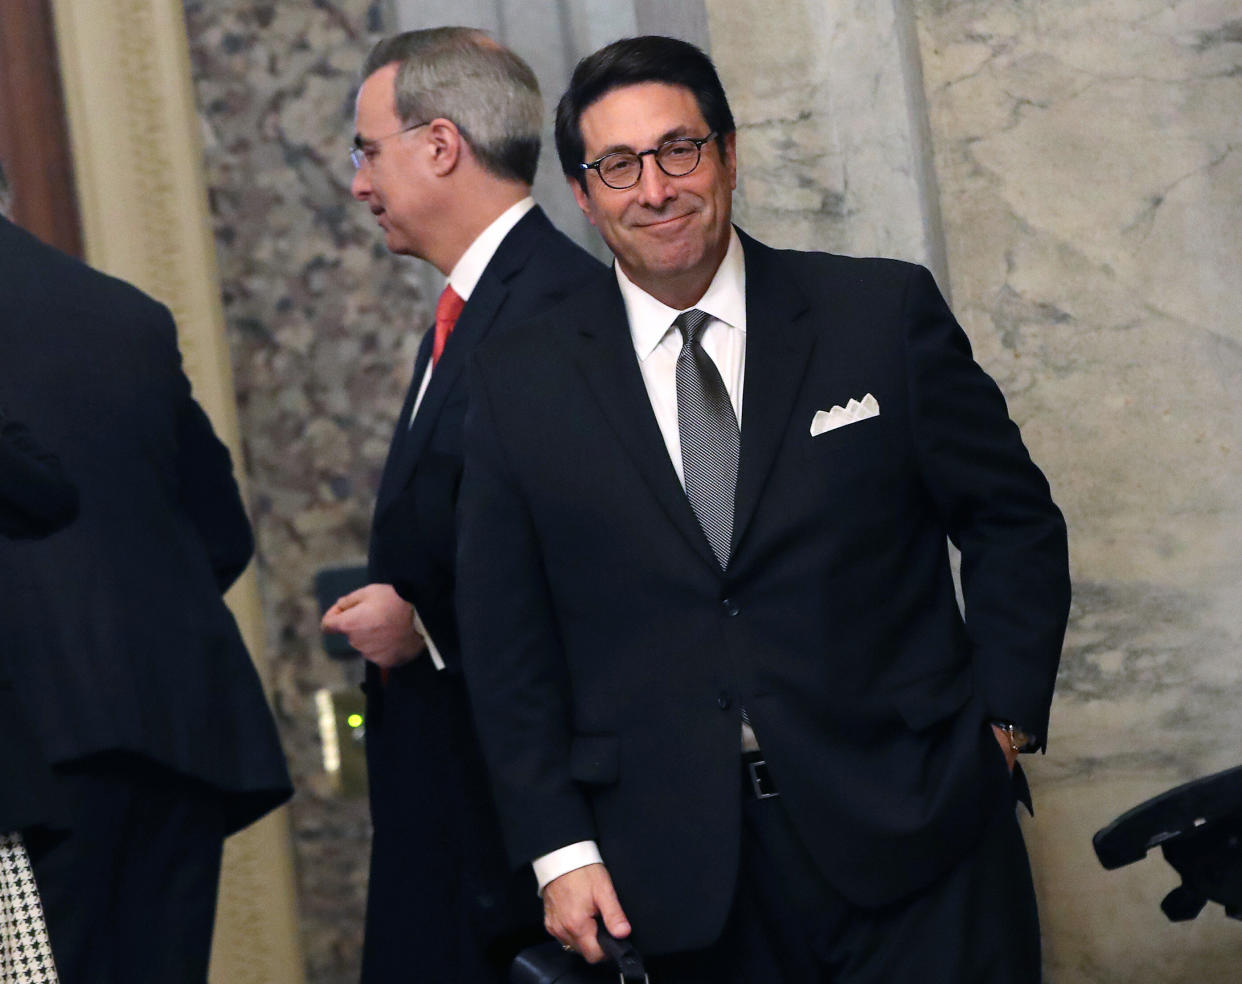 President Donald Trump's personal lawyer Jay Sekulow arrives at the U.S. Capitol on Feb. 3, 2020 in Washington, DC. (Photo: Mark Wilson via Getty Images)